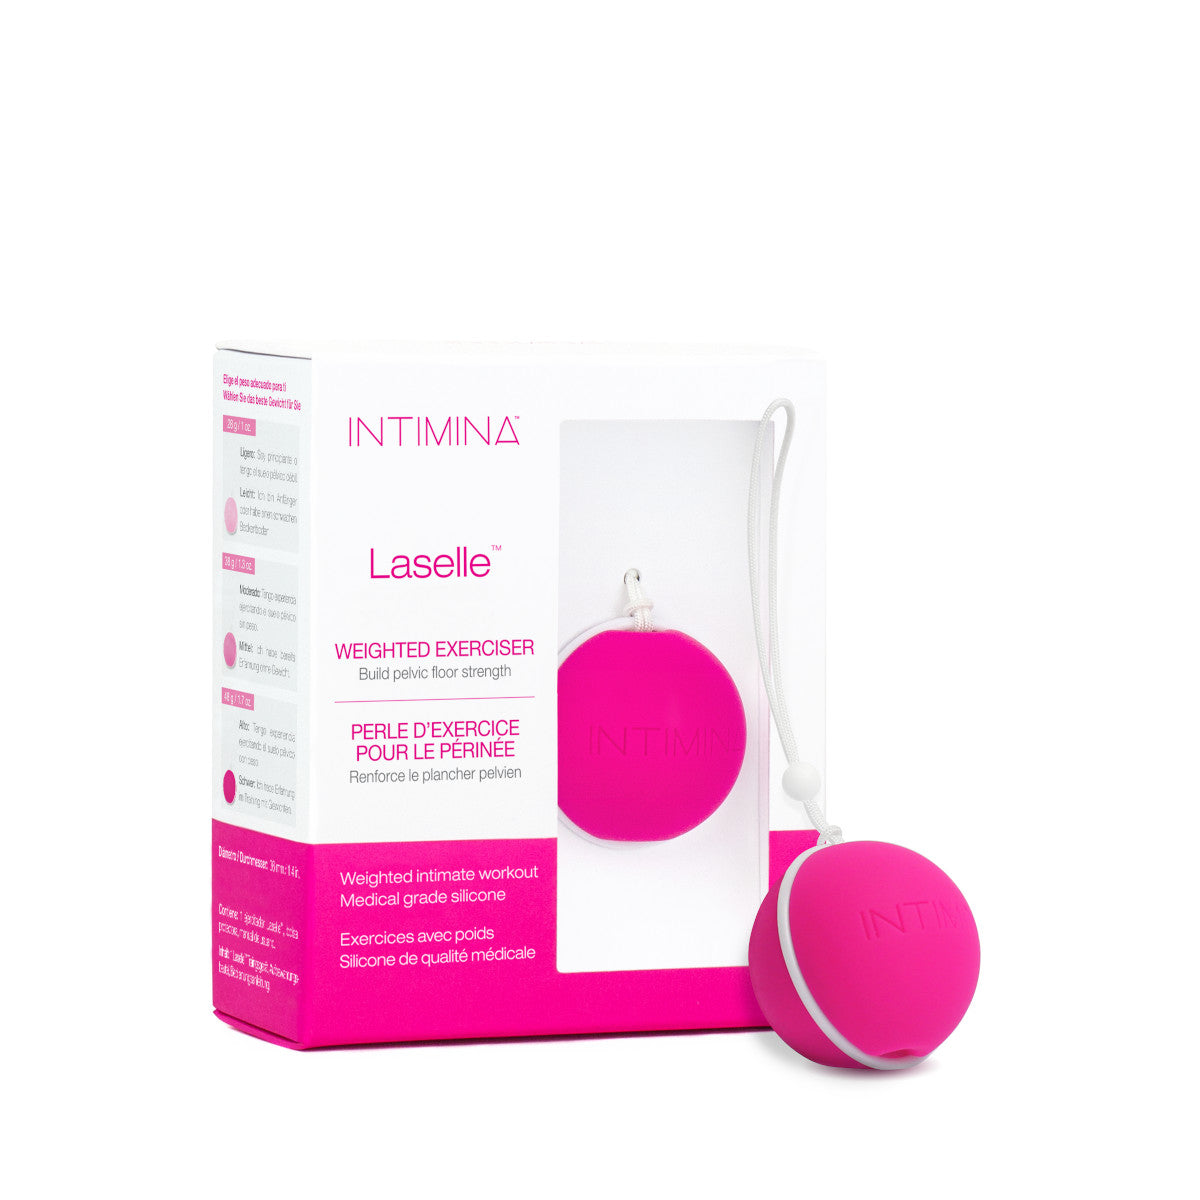 Intimina Laselle Exerciser 48g Advanced Weighted Ball for Experts